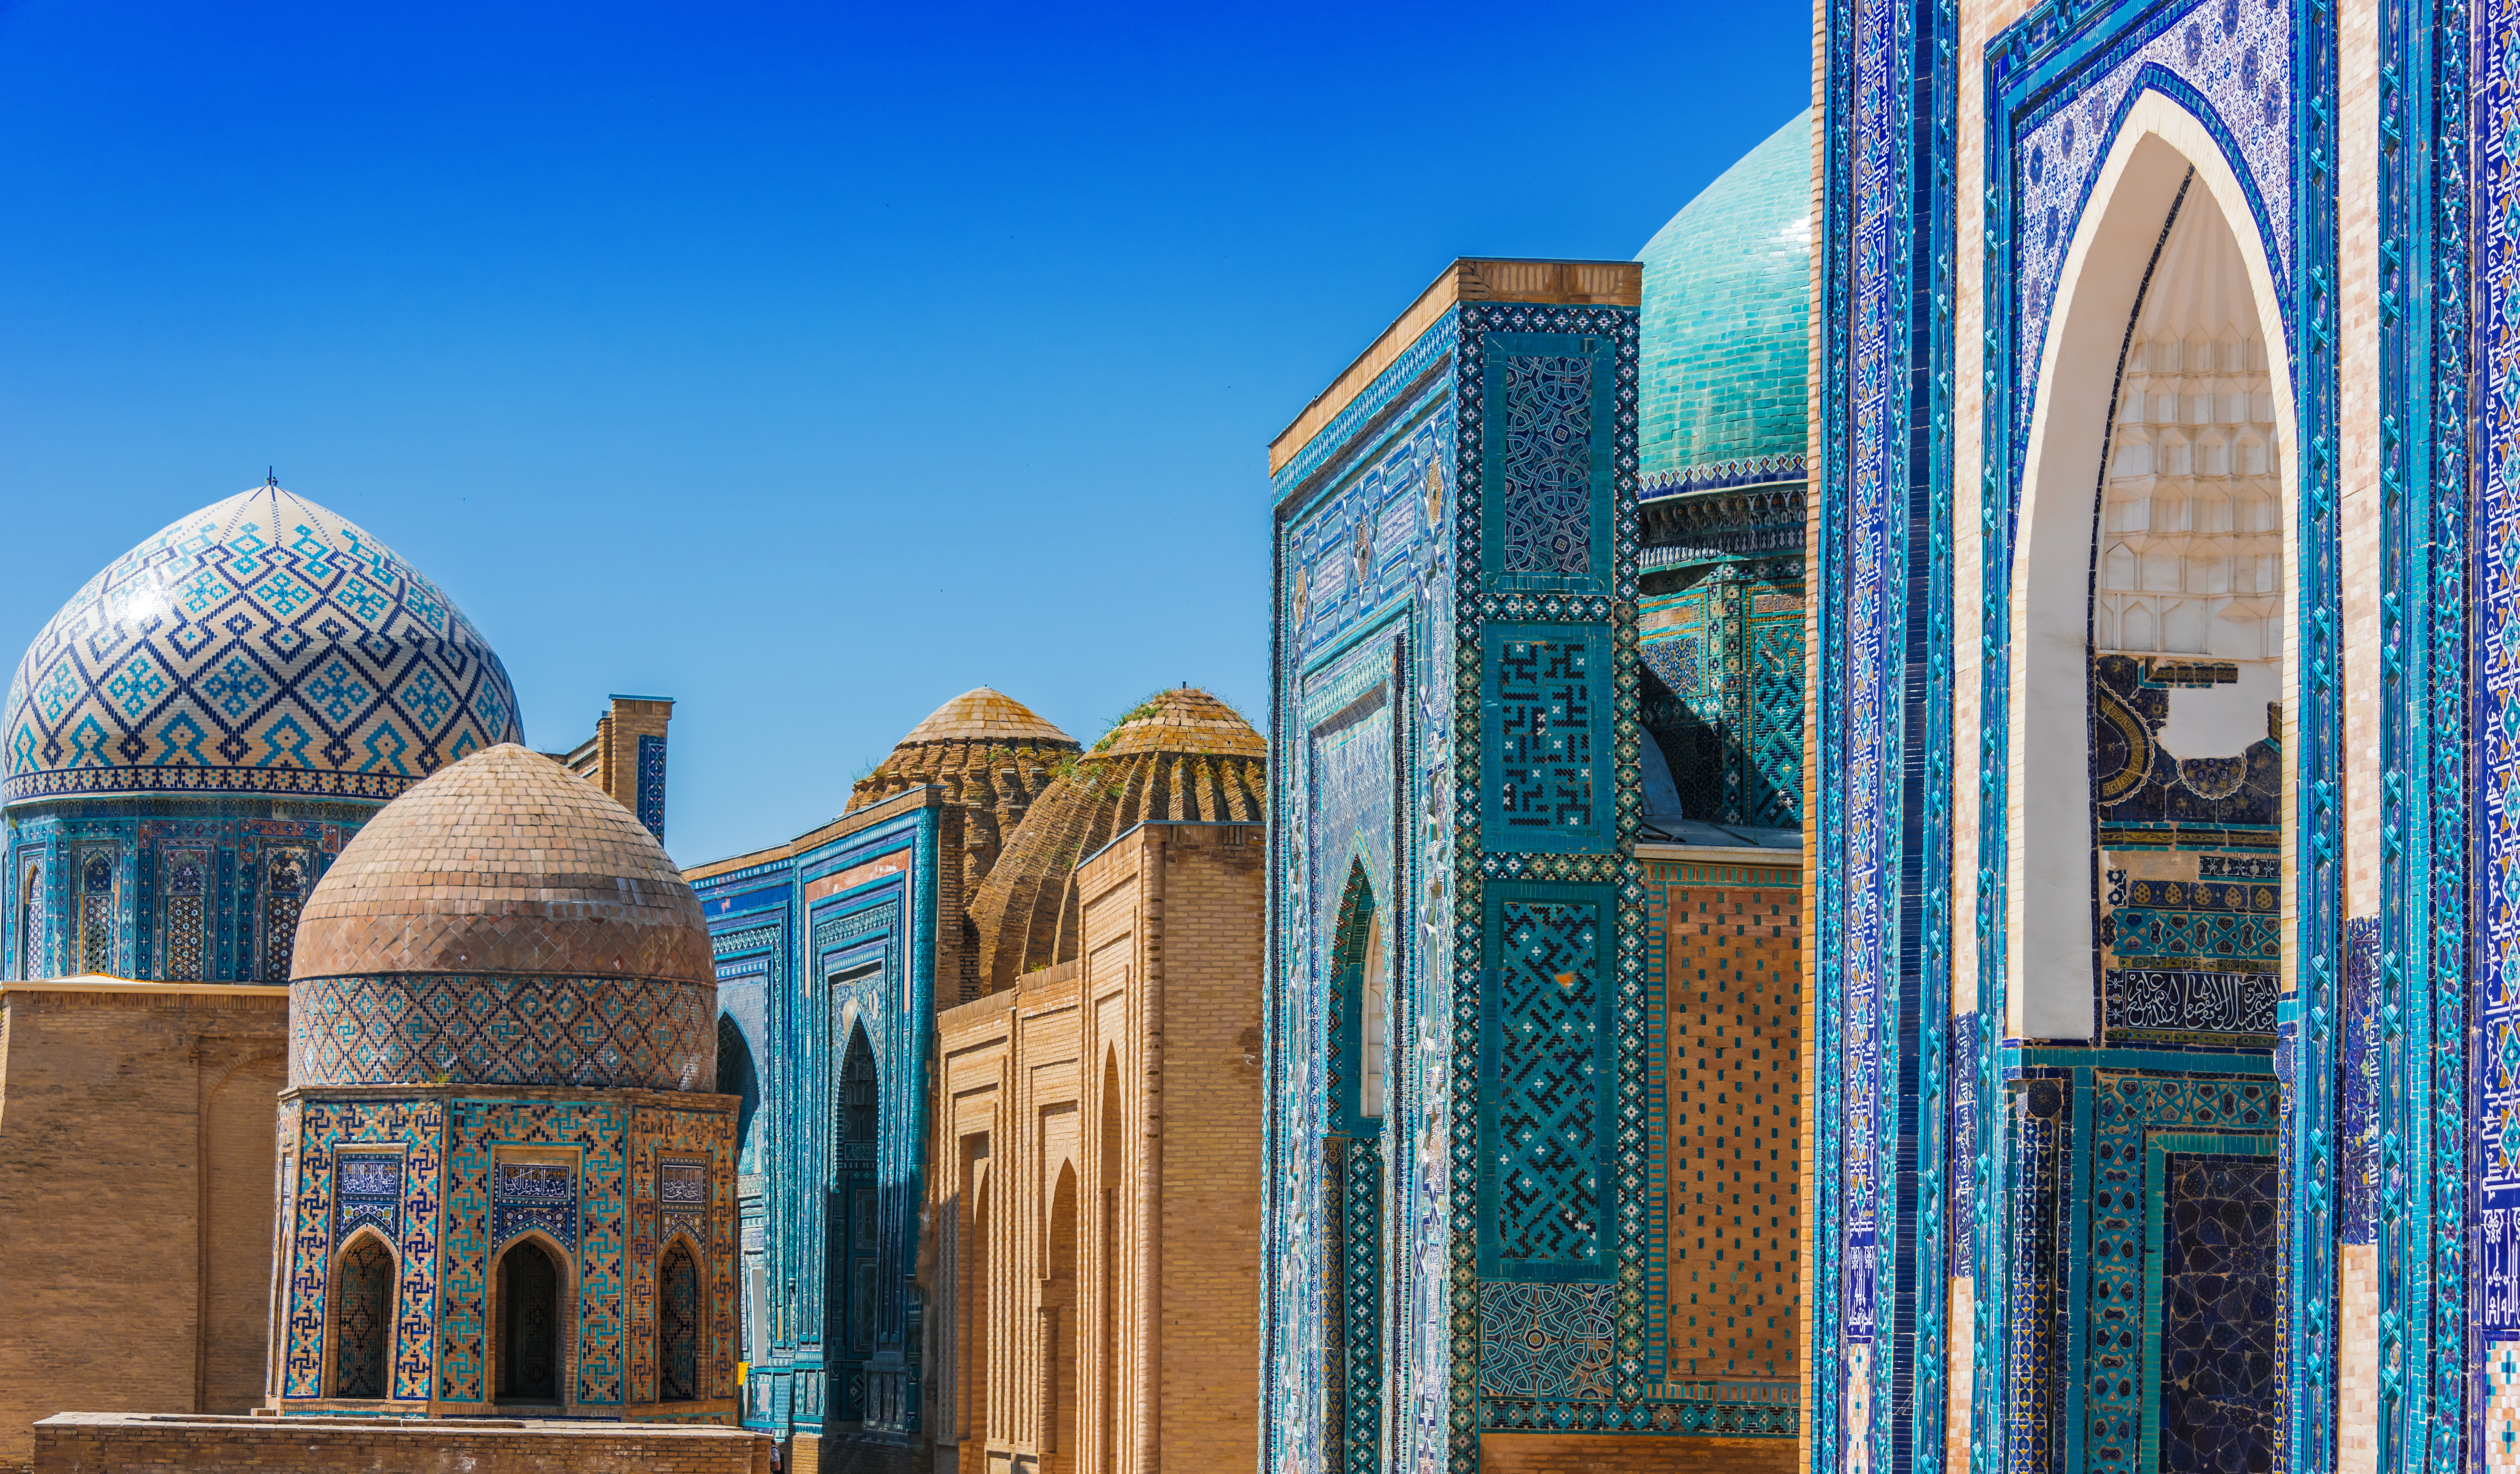 Islamic architecture, designs, and patterns in different shades of blue, Shah-i-Zinda, Uzbekistan – © monticello / Shutterstock